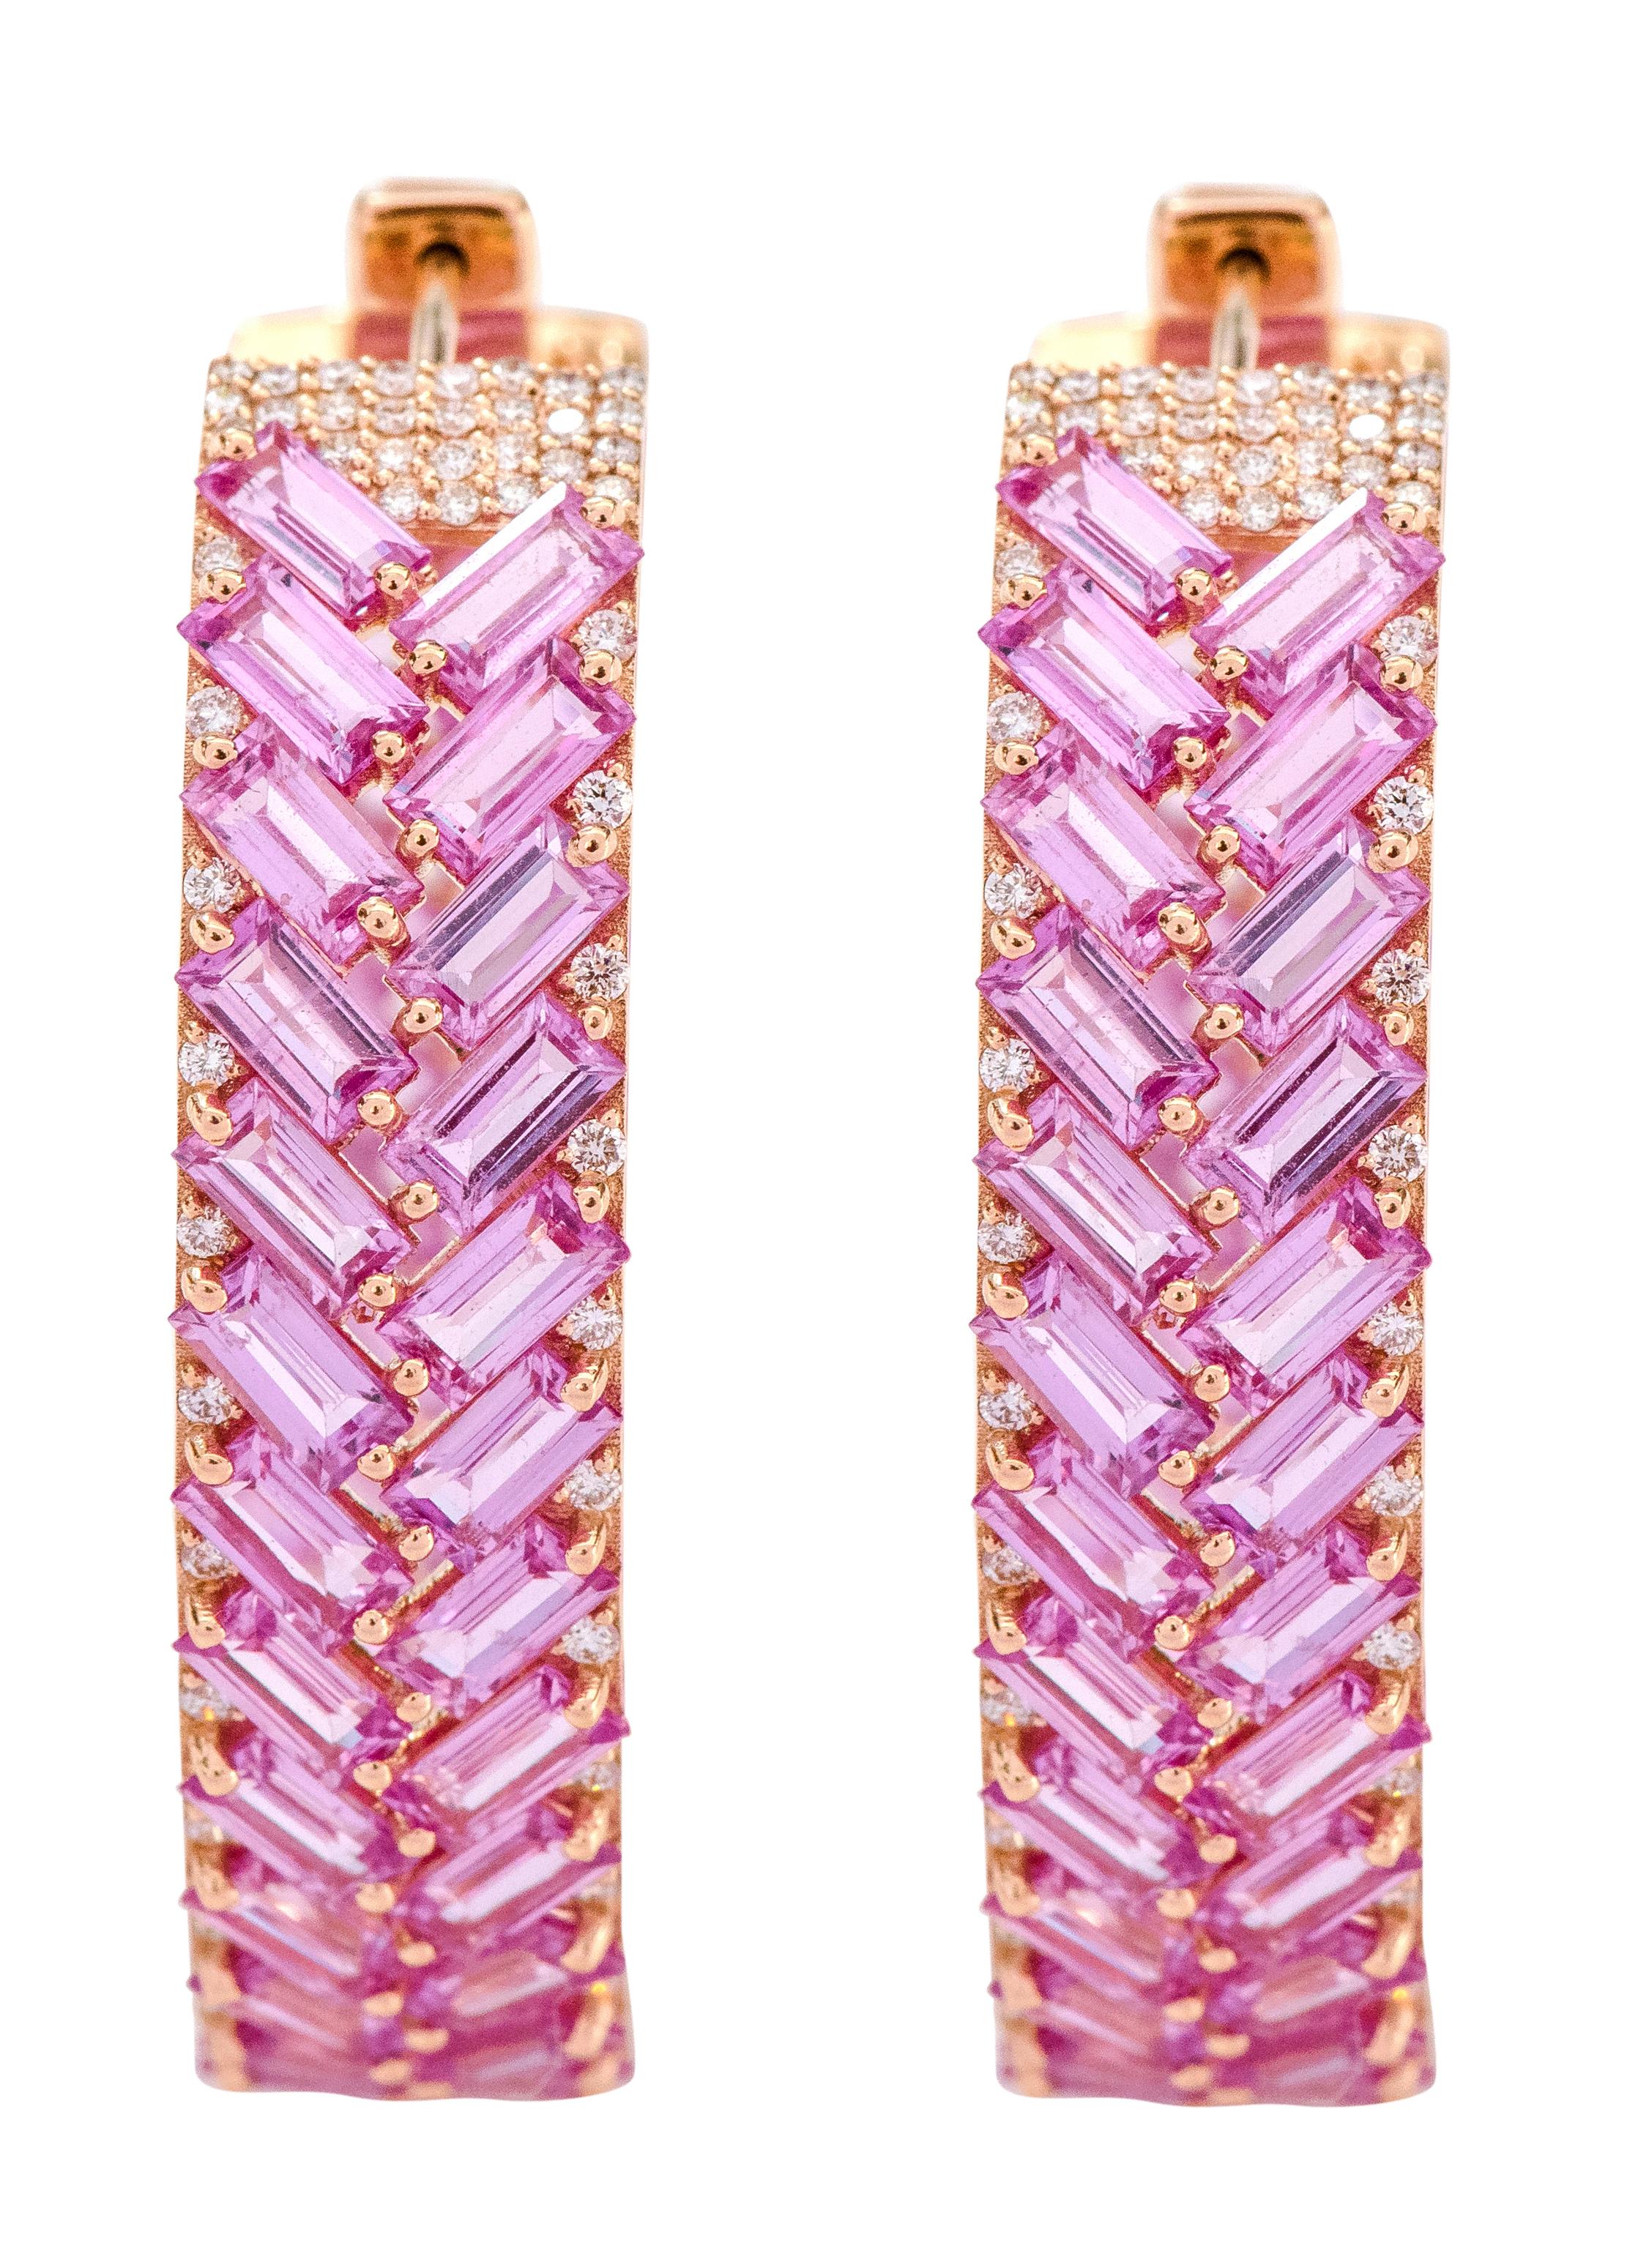 18 Karat Rose Gold 21.80 Carat Pink Sapphire and Diamond Hoop Earrings

This adorable and glamorous vibrant pink sapphire criss-cross hoop earring is extraordinary. The identically sized baguette pink sapphires are angled beautifully side by side